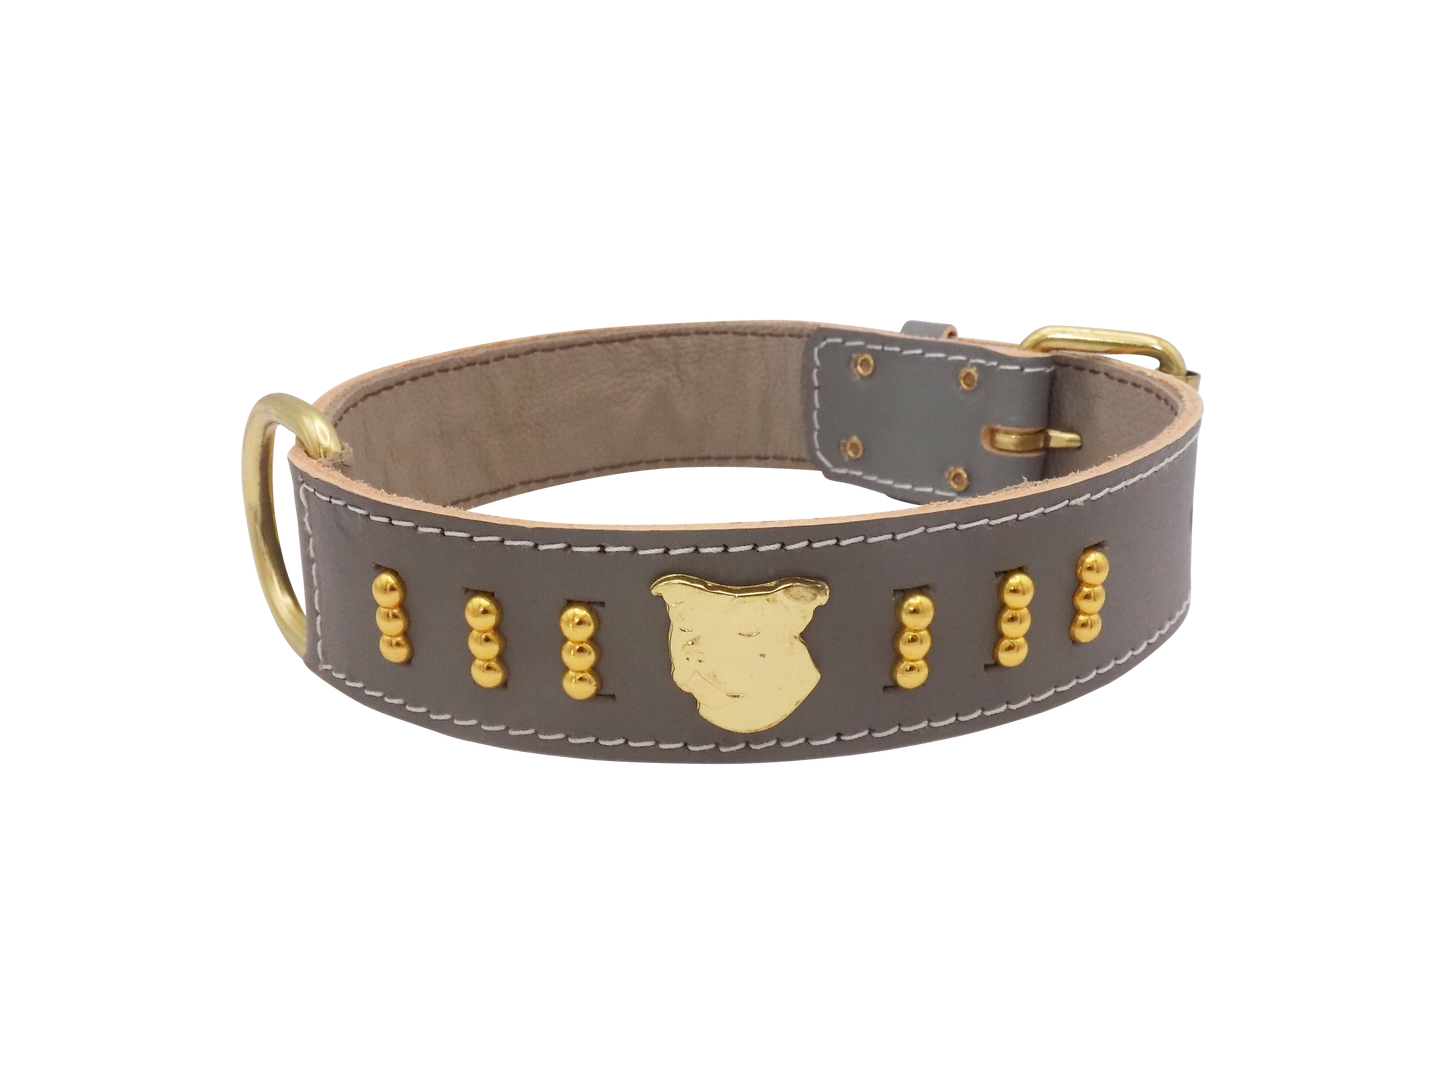 1.5" wide Staffy Leather Dog Collar with Gold Unique Decorative Design and Staffordshire Bull Terrier Badge